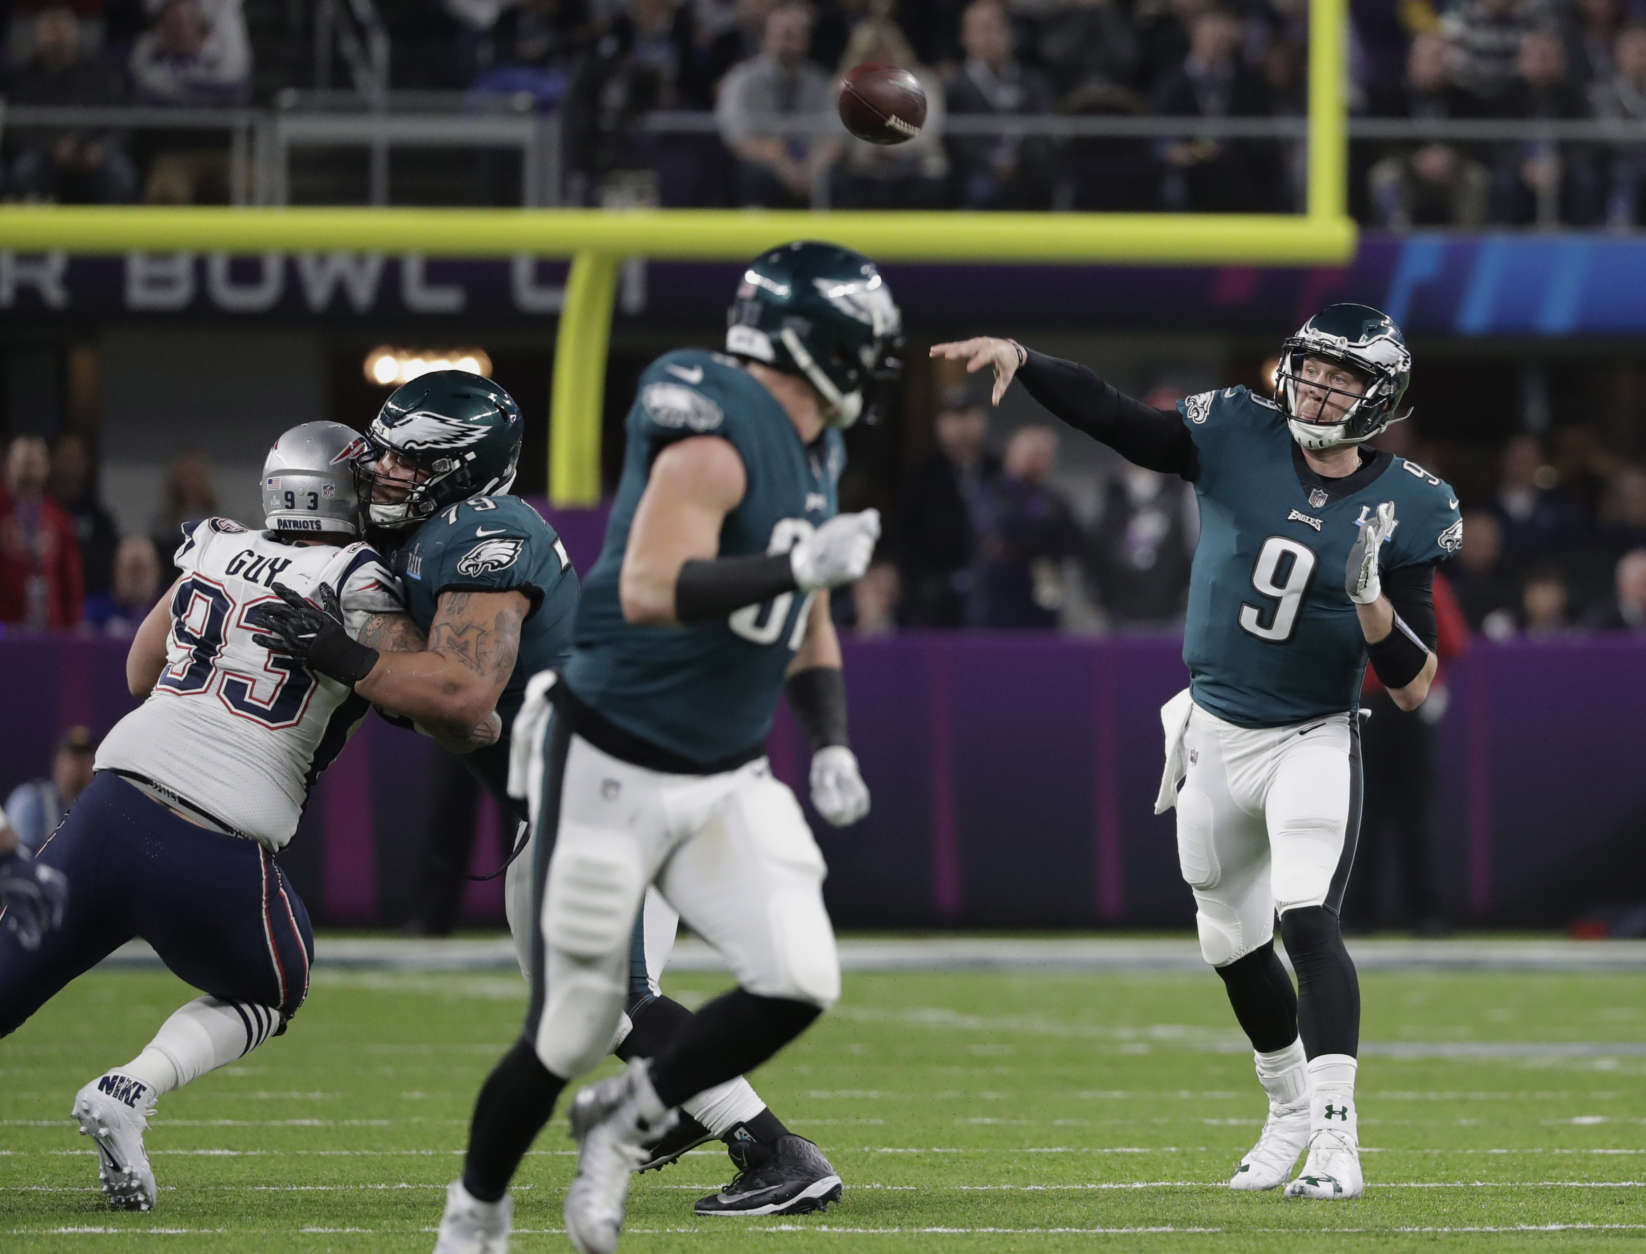 Philadelphia Eagles quarterback Nick Foles (9) throws against the New England Patriots, during the second half of the NFL Super Bowl 52 football game, Sunday, Feb. 4, 2018, in Minneapolis. (AP Photo/Tony Gutierrez)